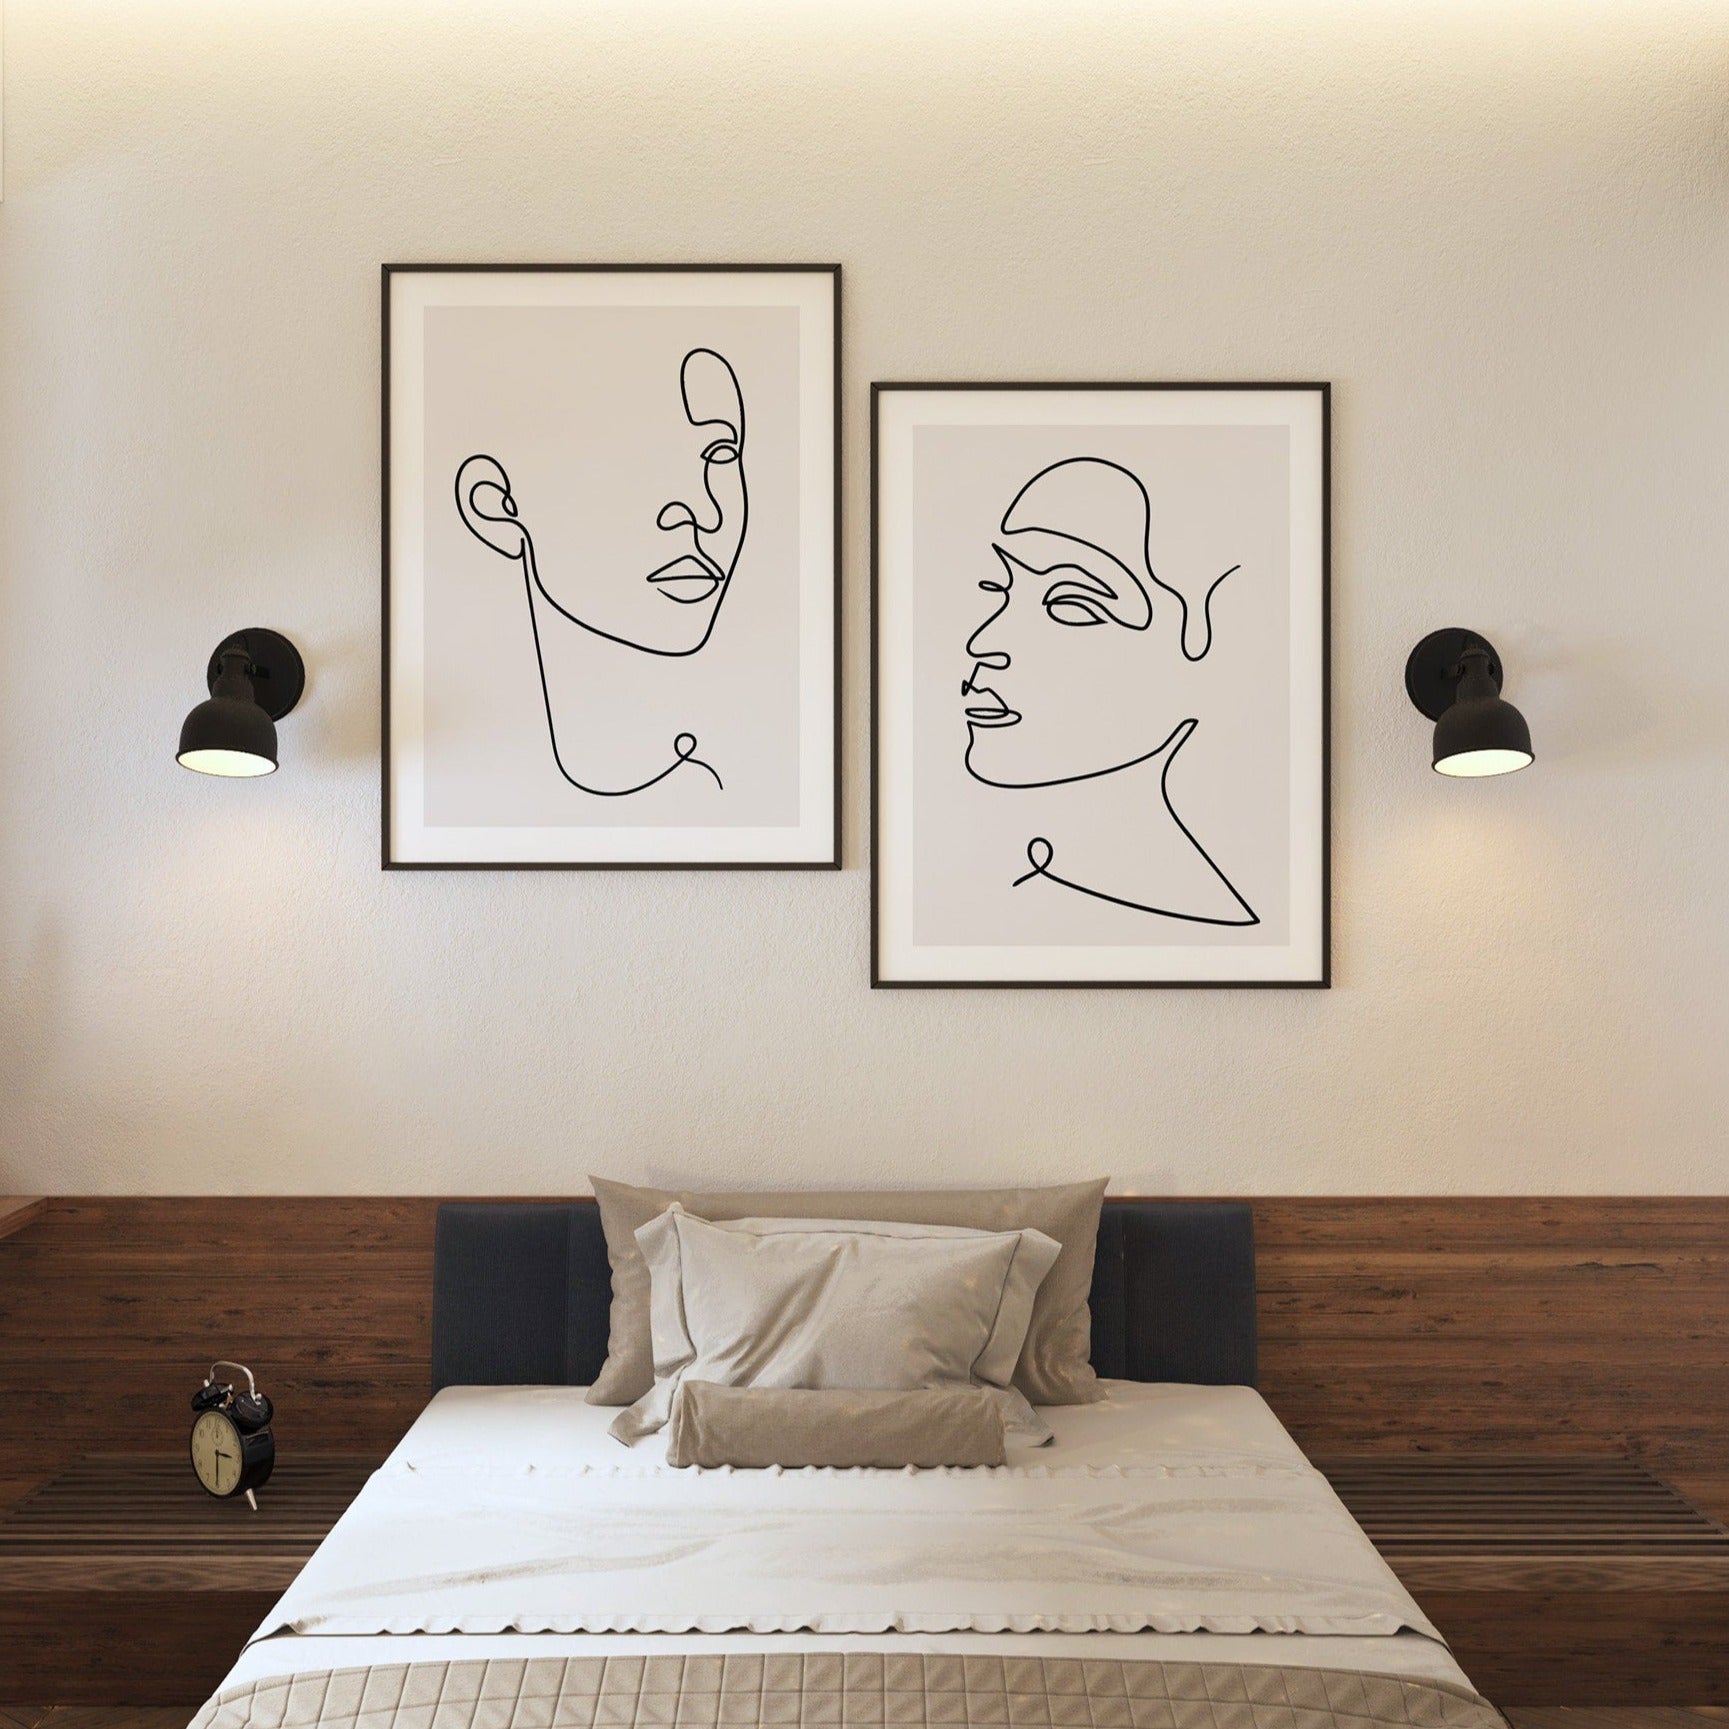 Bedroom decor with line art above bed